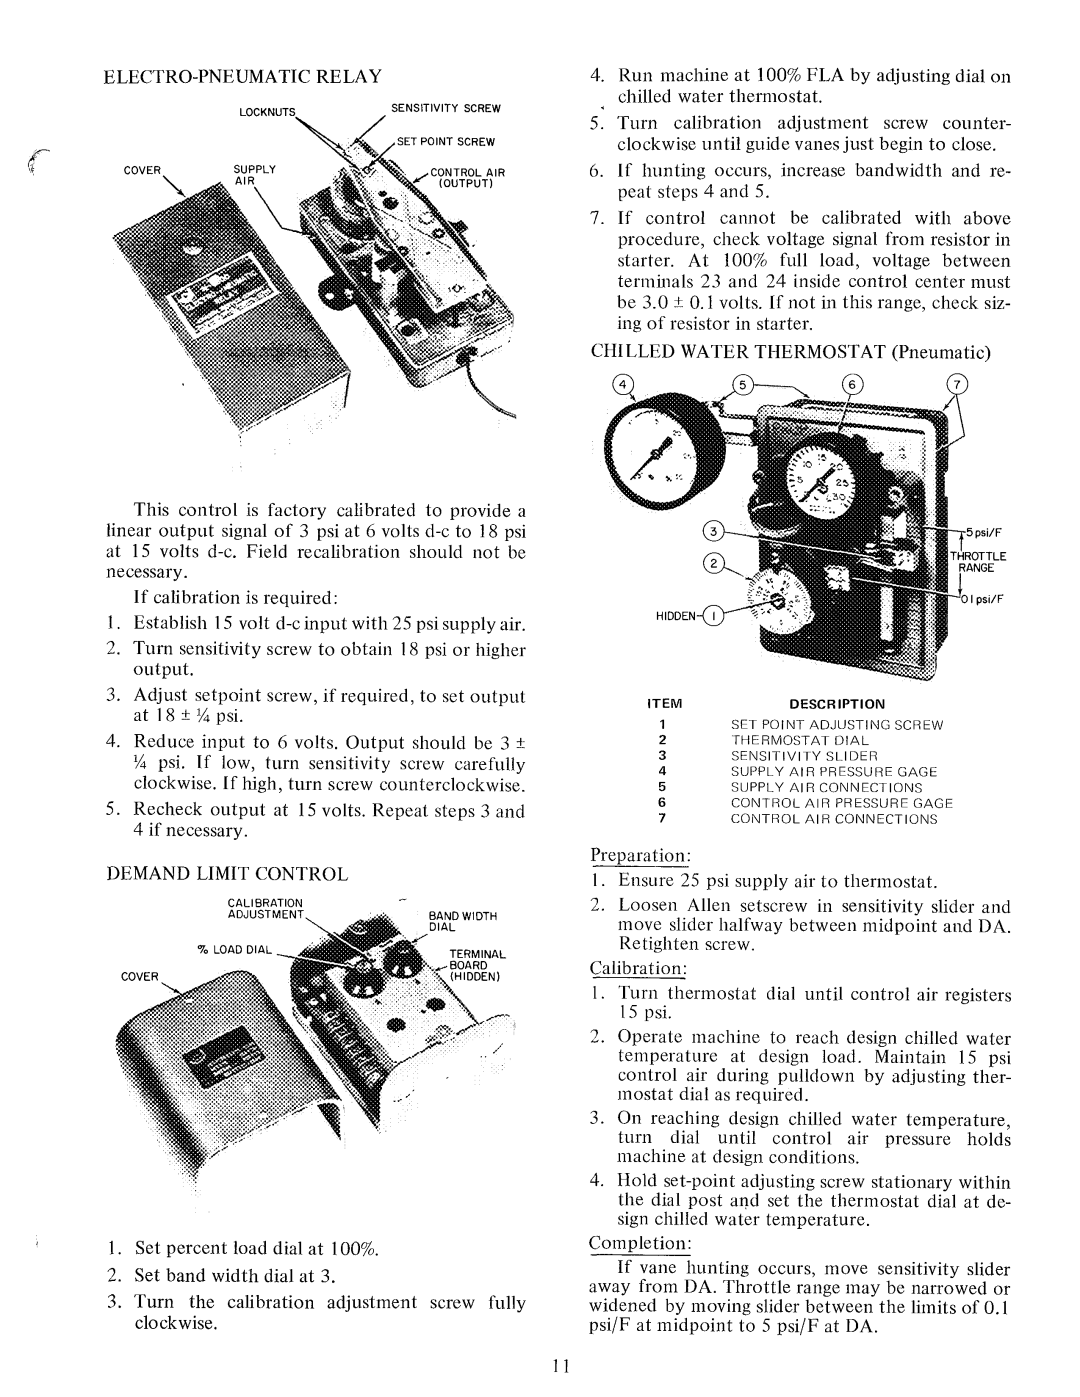 Carrier 19CB manual 